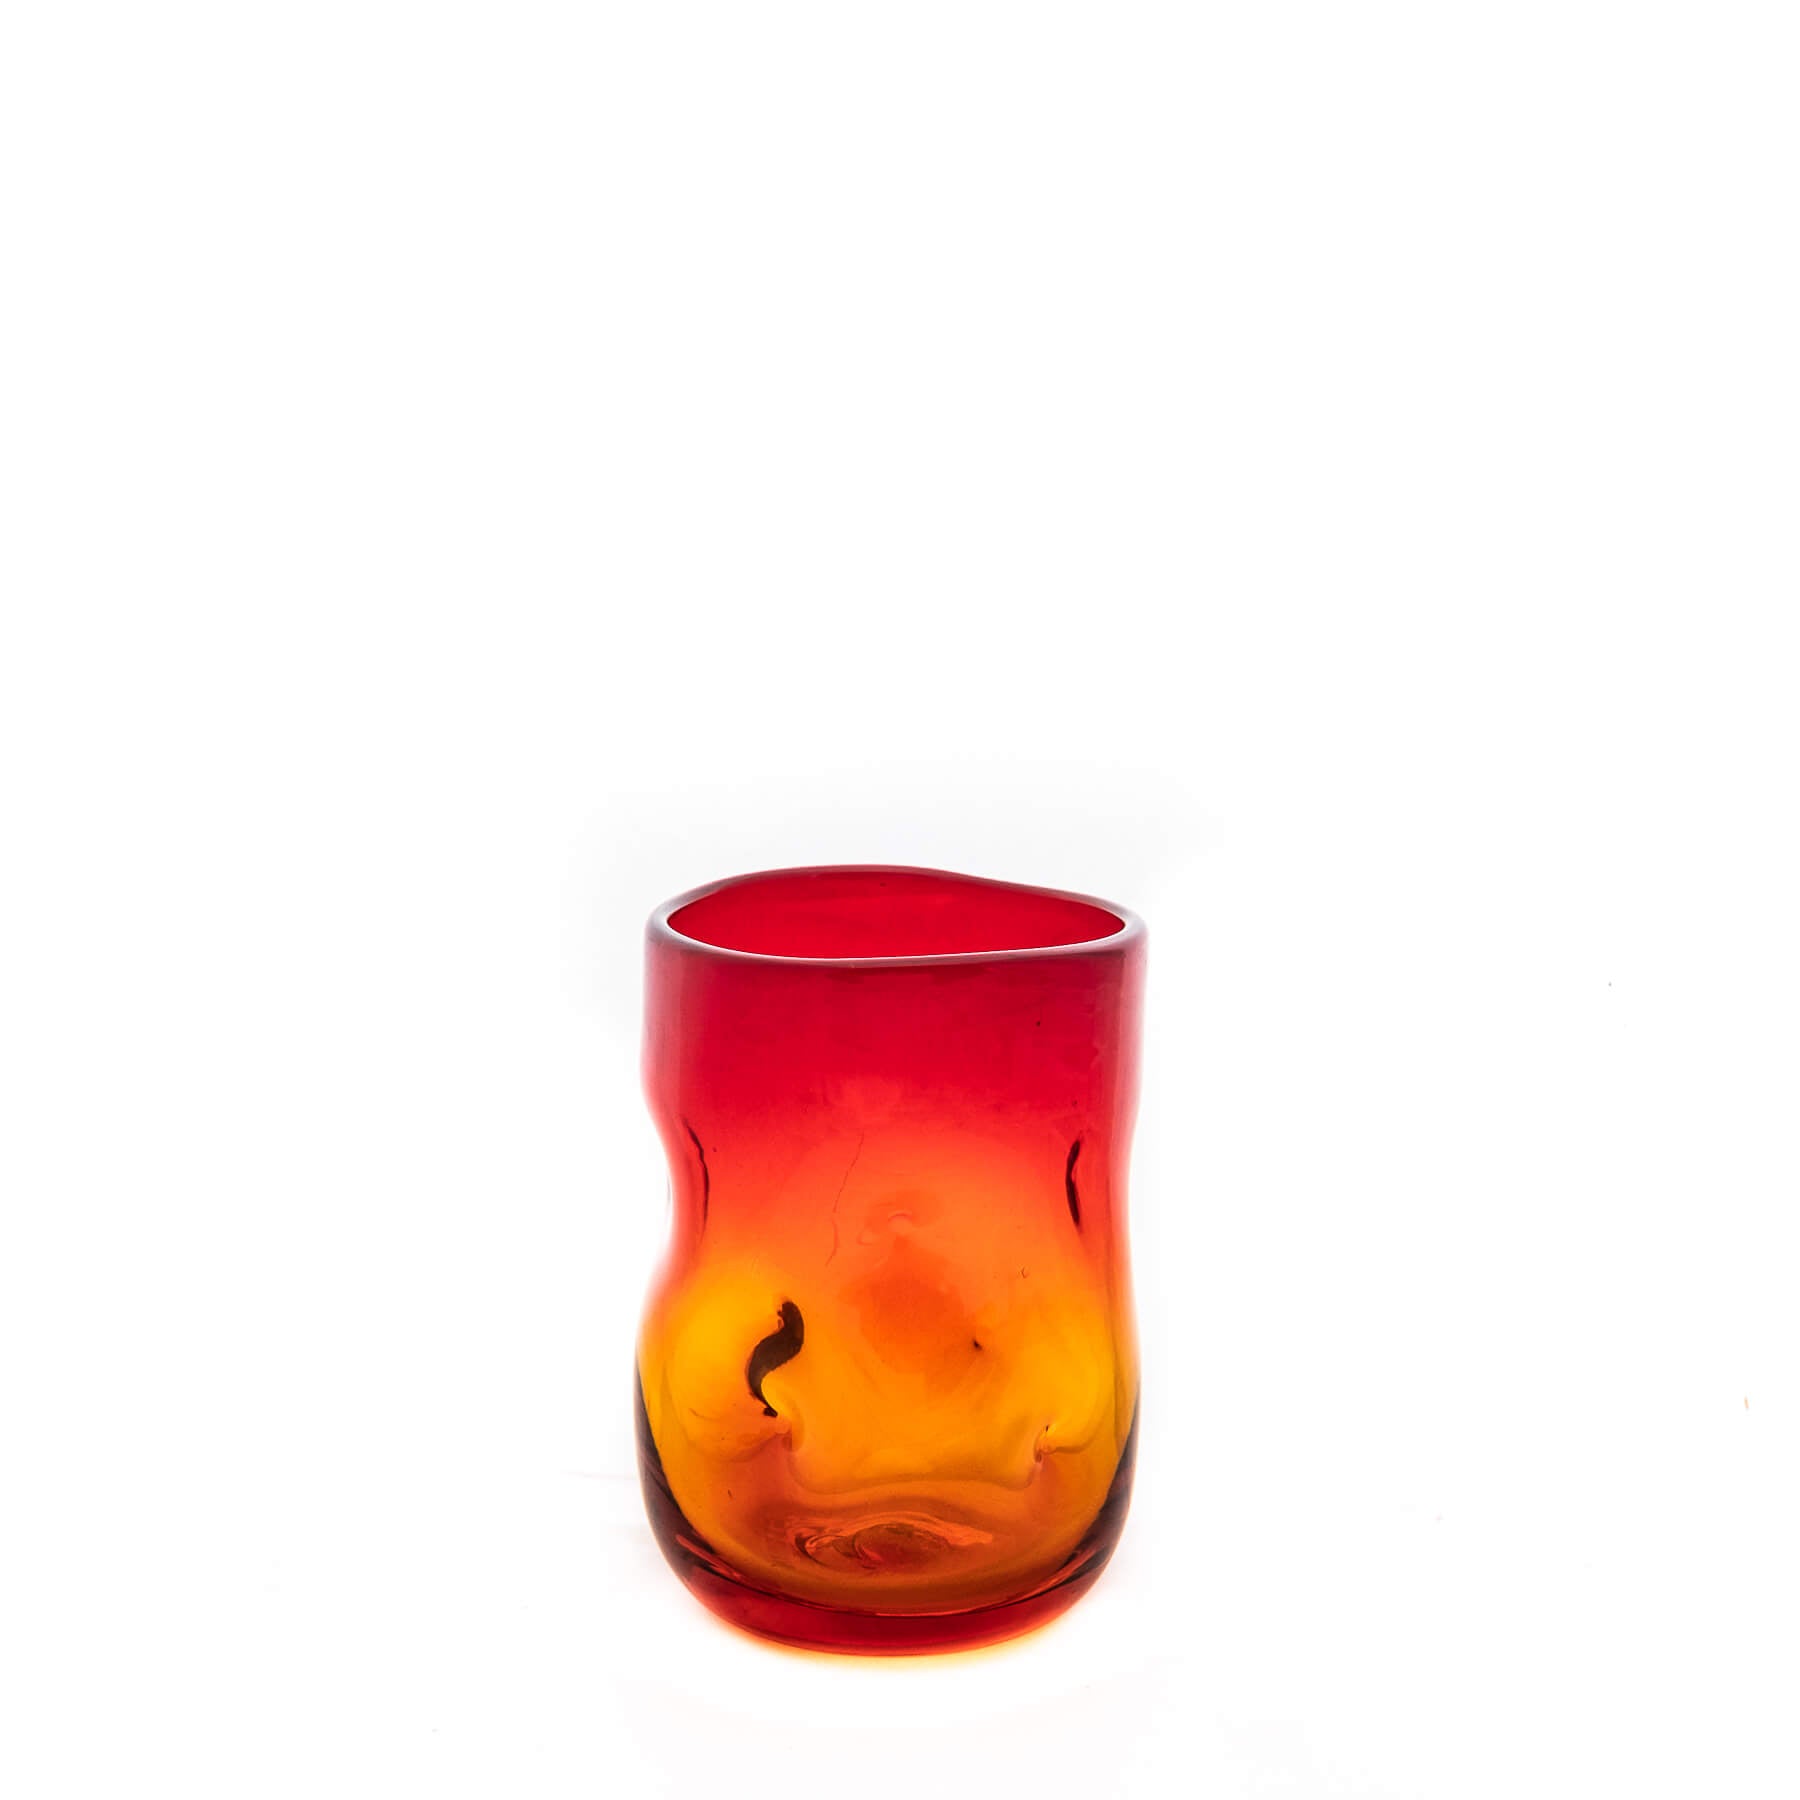 Product photo for Blenko 418S Small Dimple Glass - Tangerine